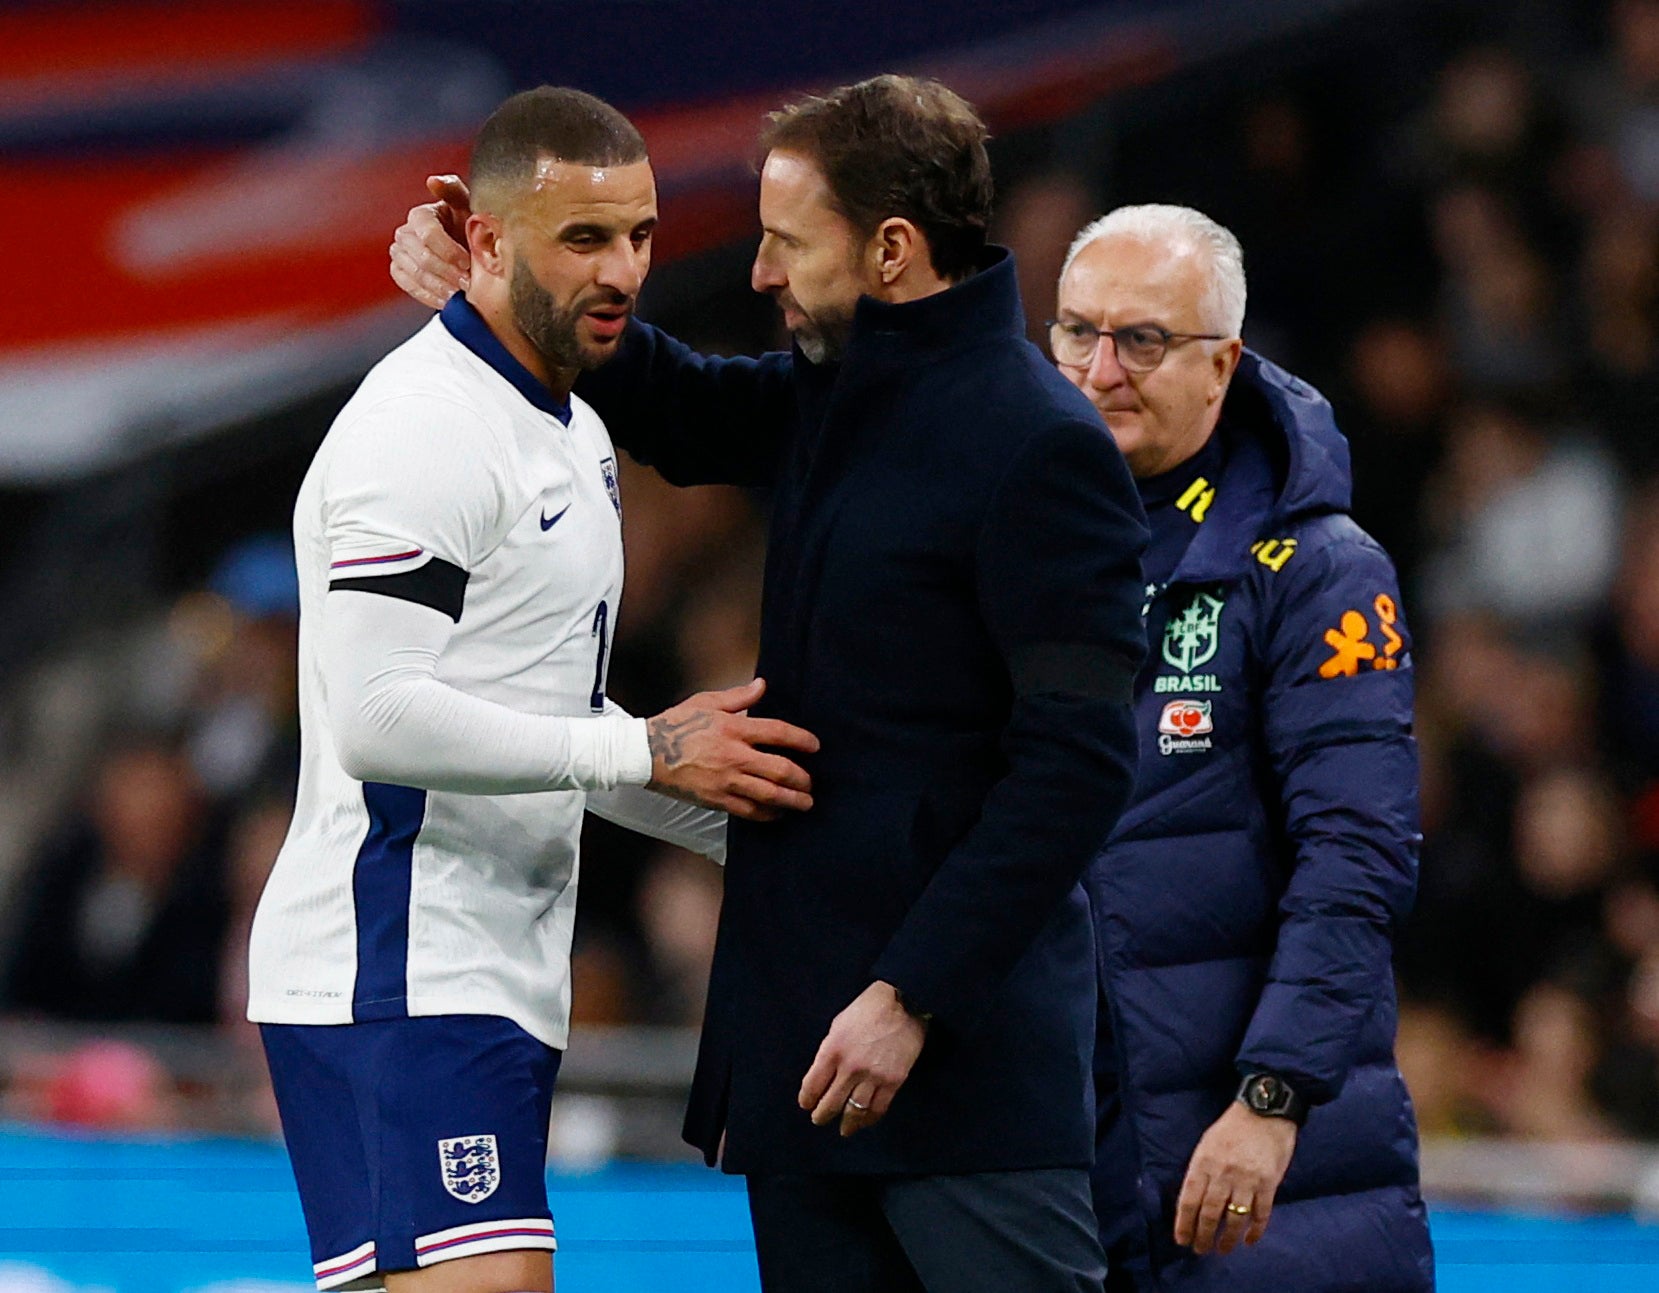 Kyle Walker captained England but was brought off midway through the first half